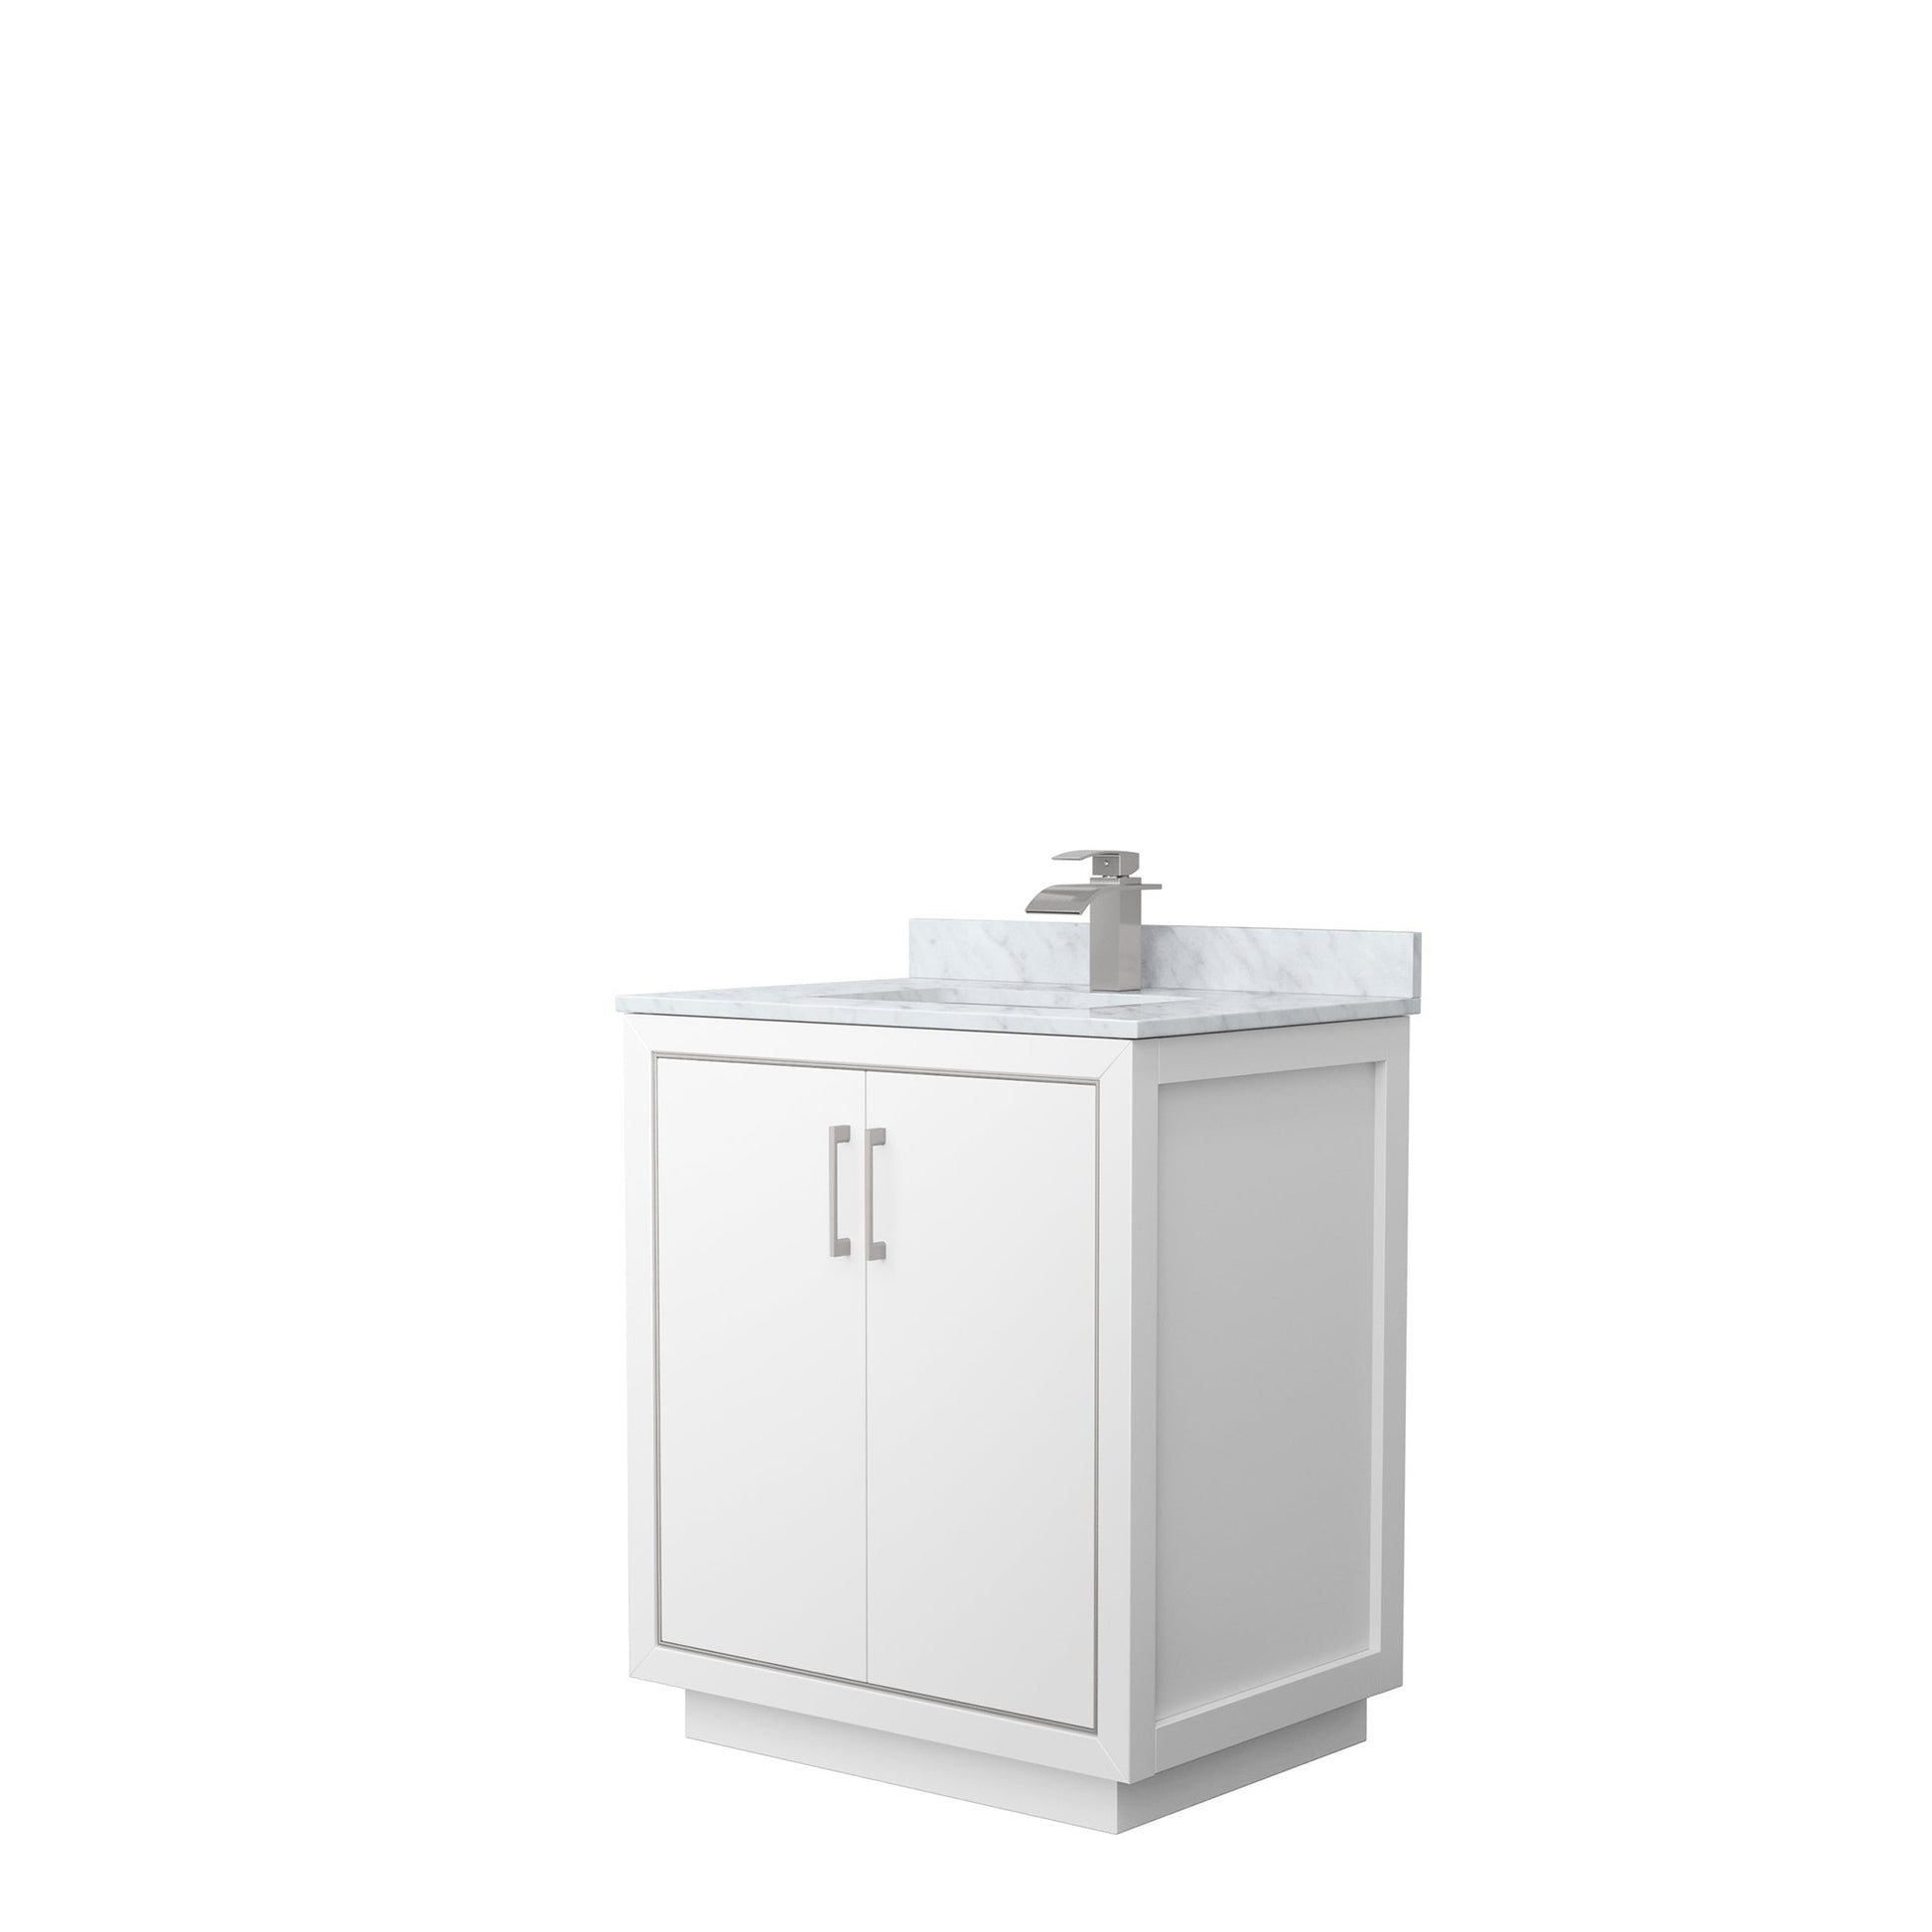 Wyndham Collection Icon 30" Single Bathroom Vanity in White, White Carrara Marble Countertop, Undermount Square Sink, Brushed Nickel Trim